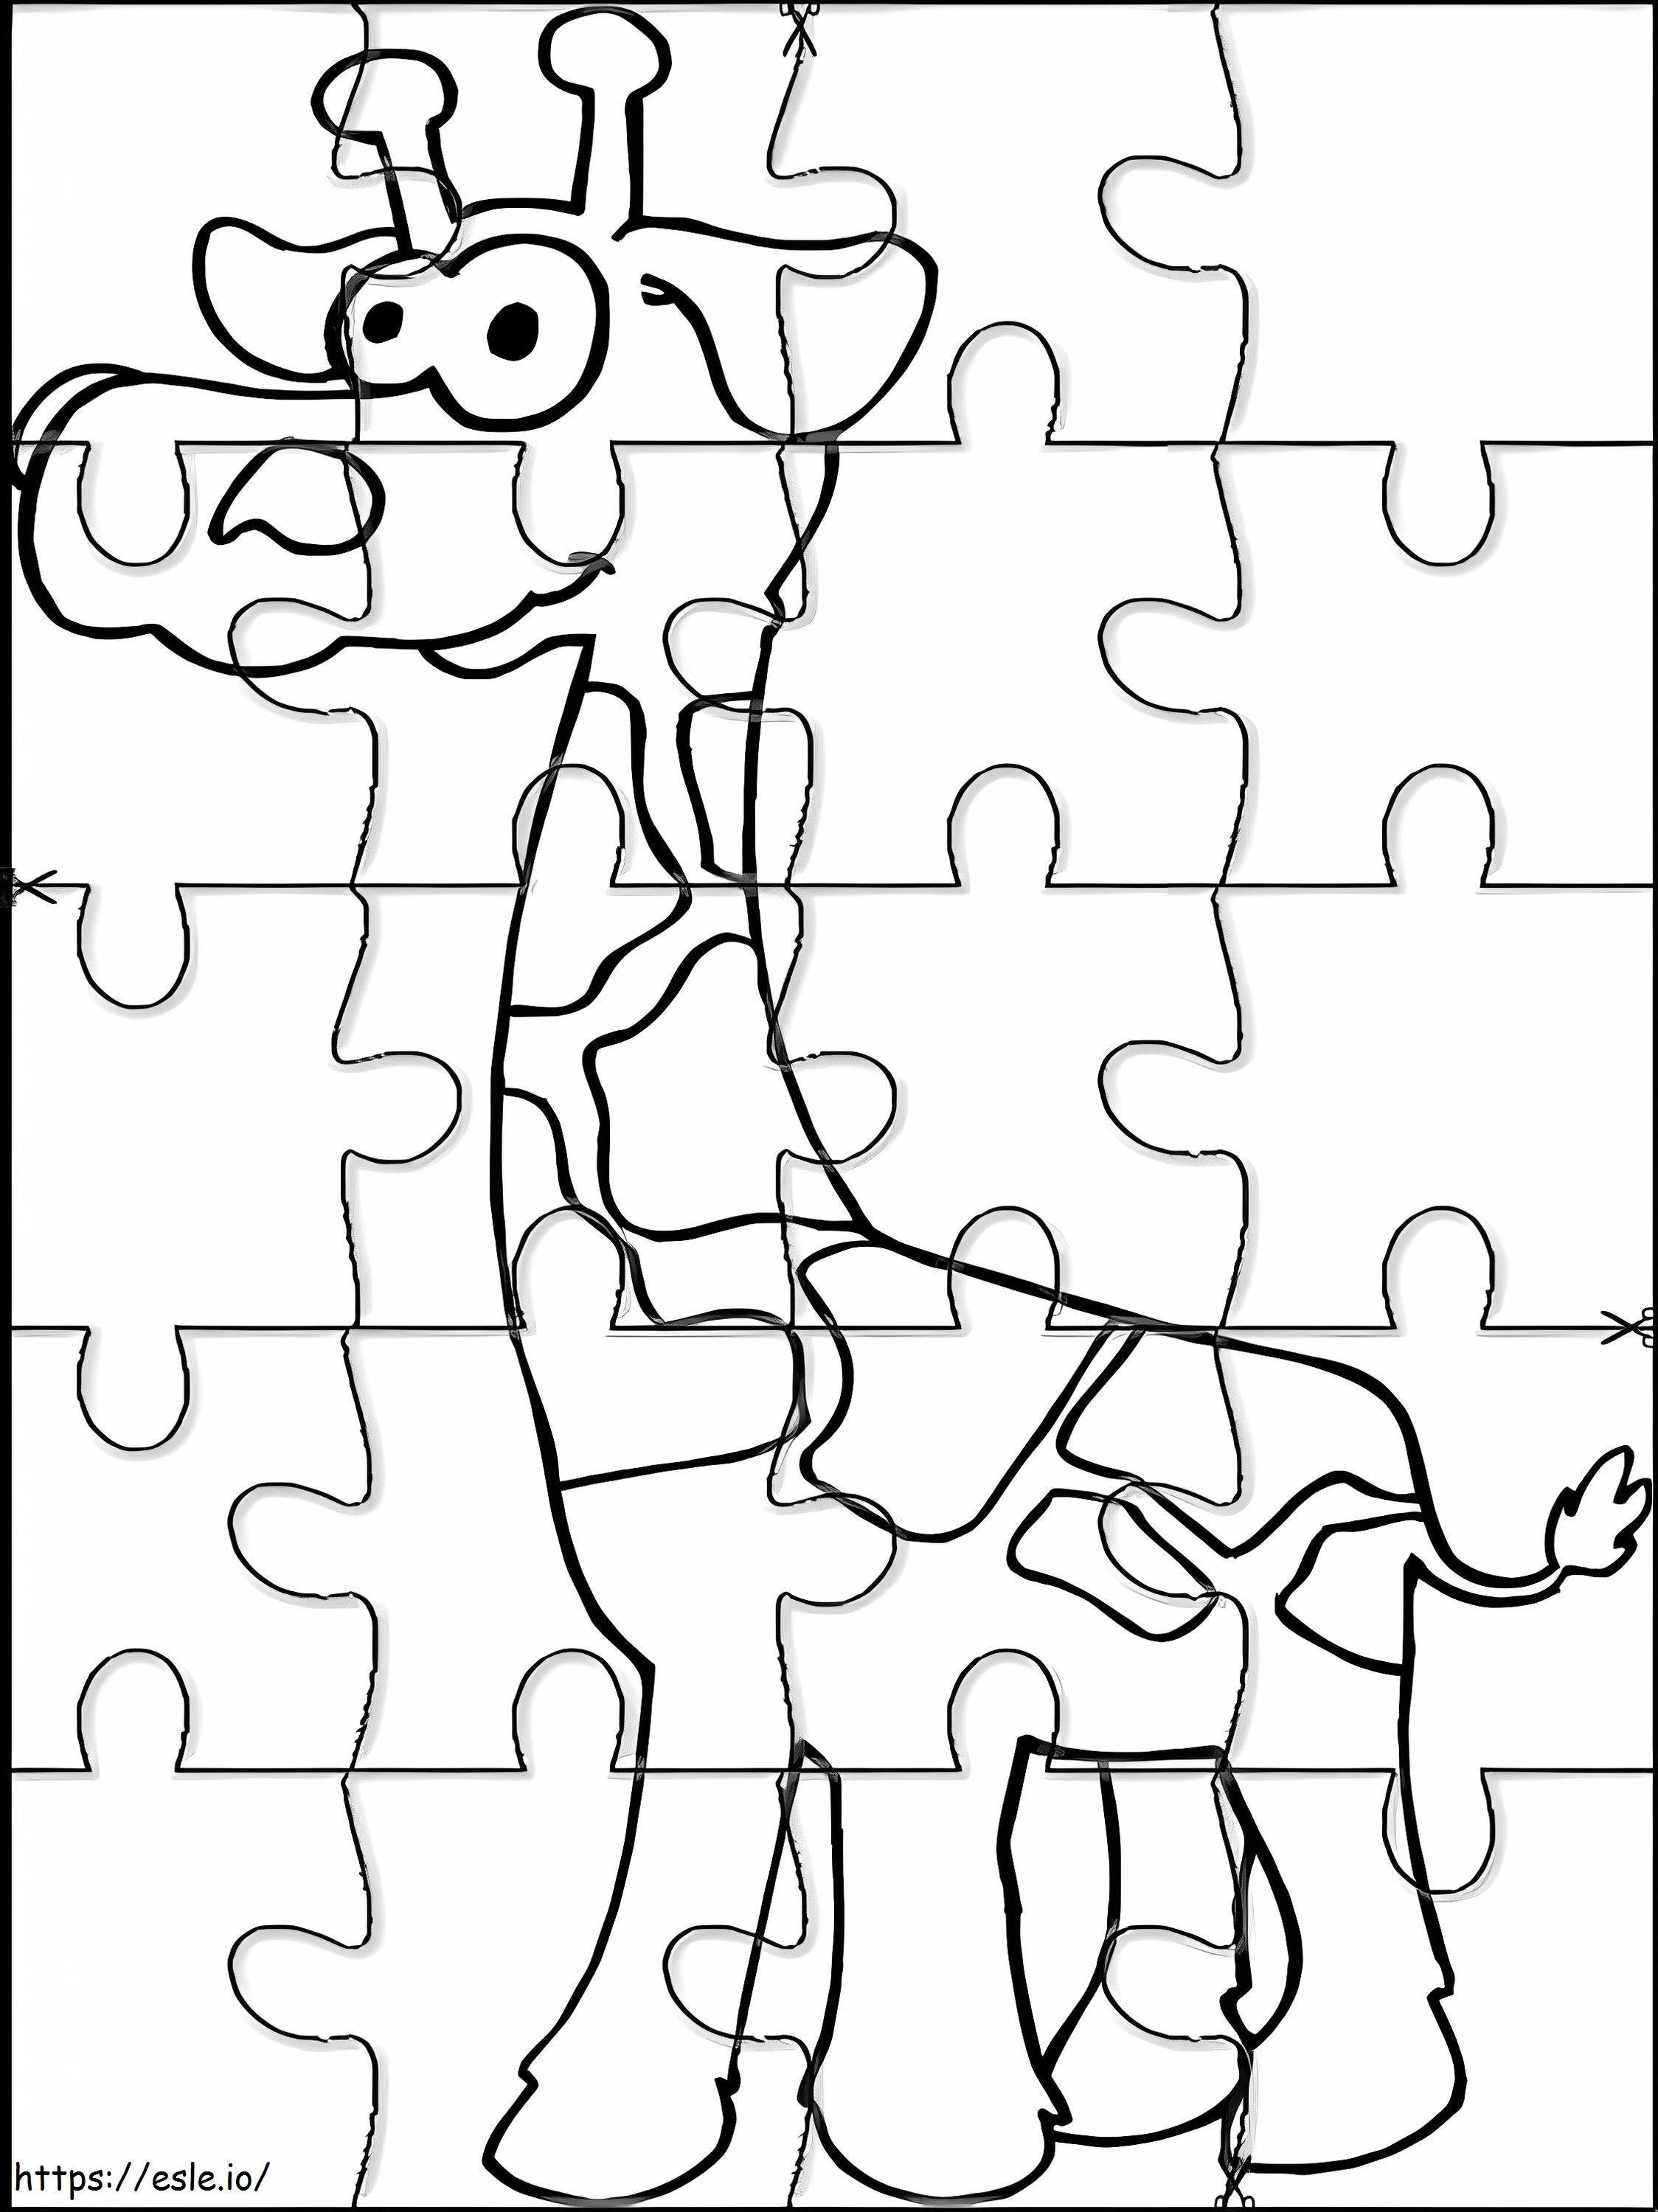 Giraffe Jigsaw Puzzle coloring page